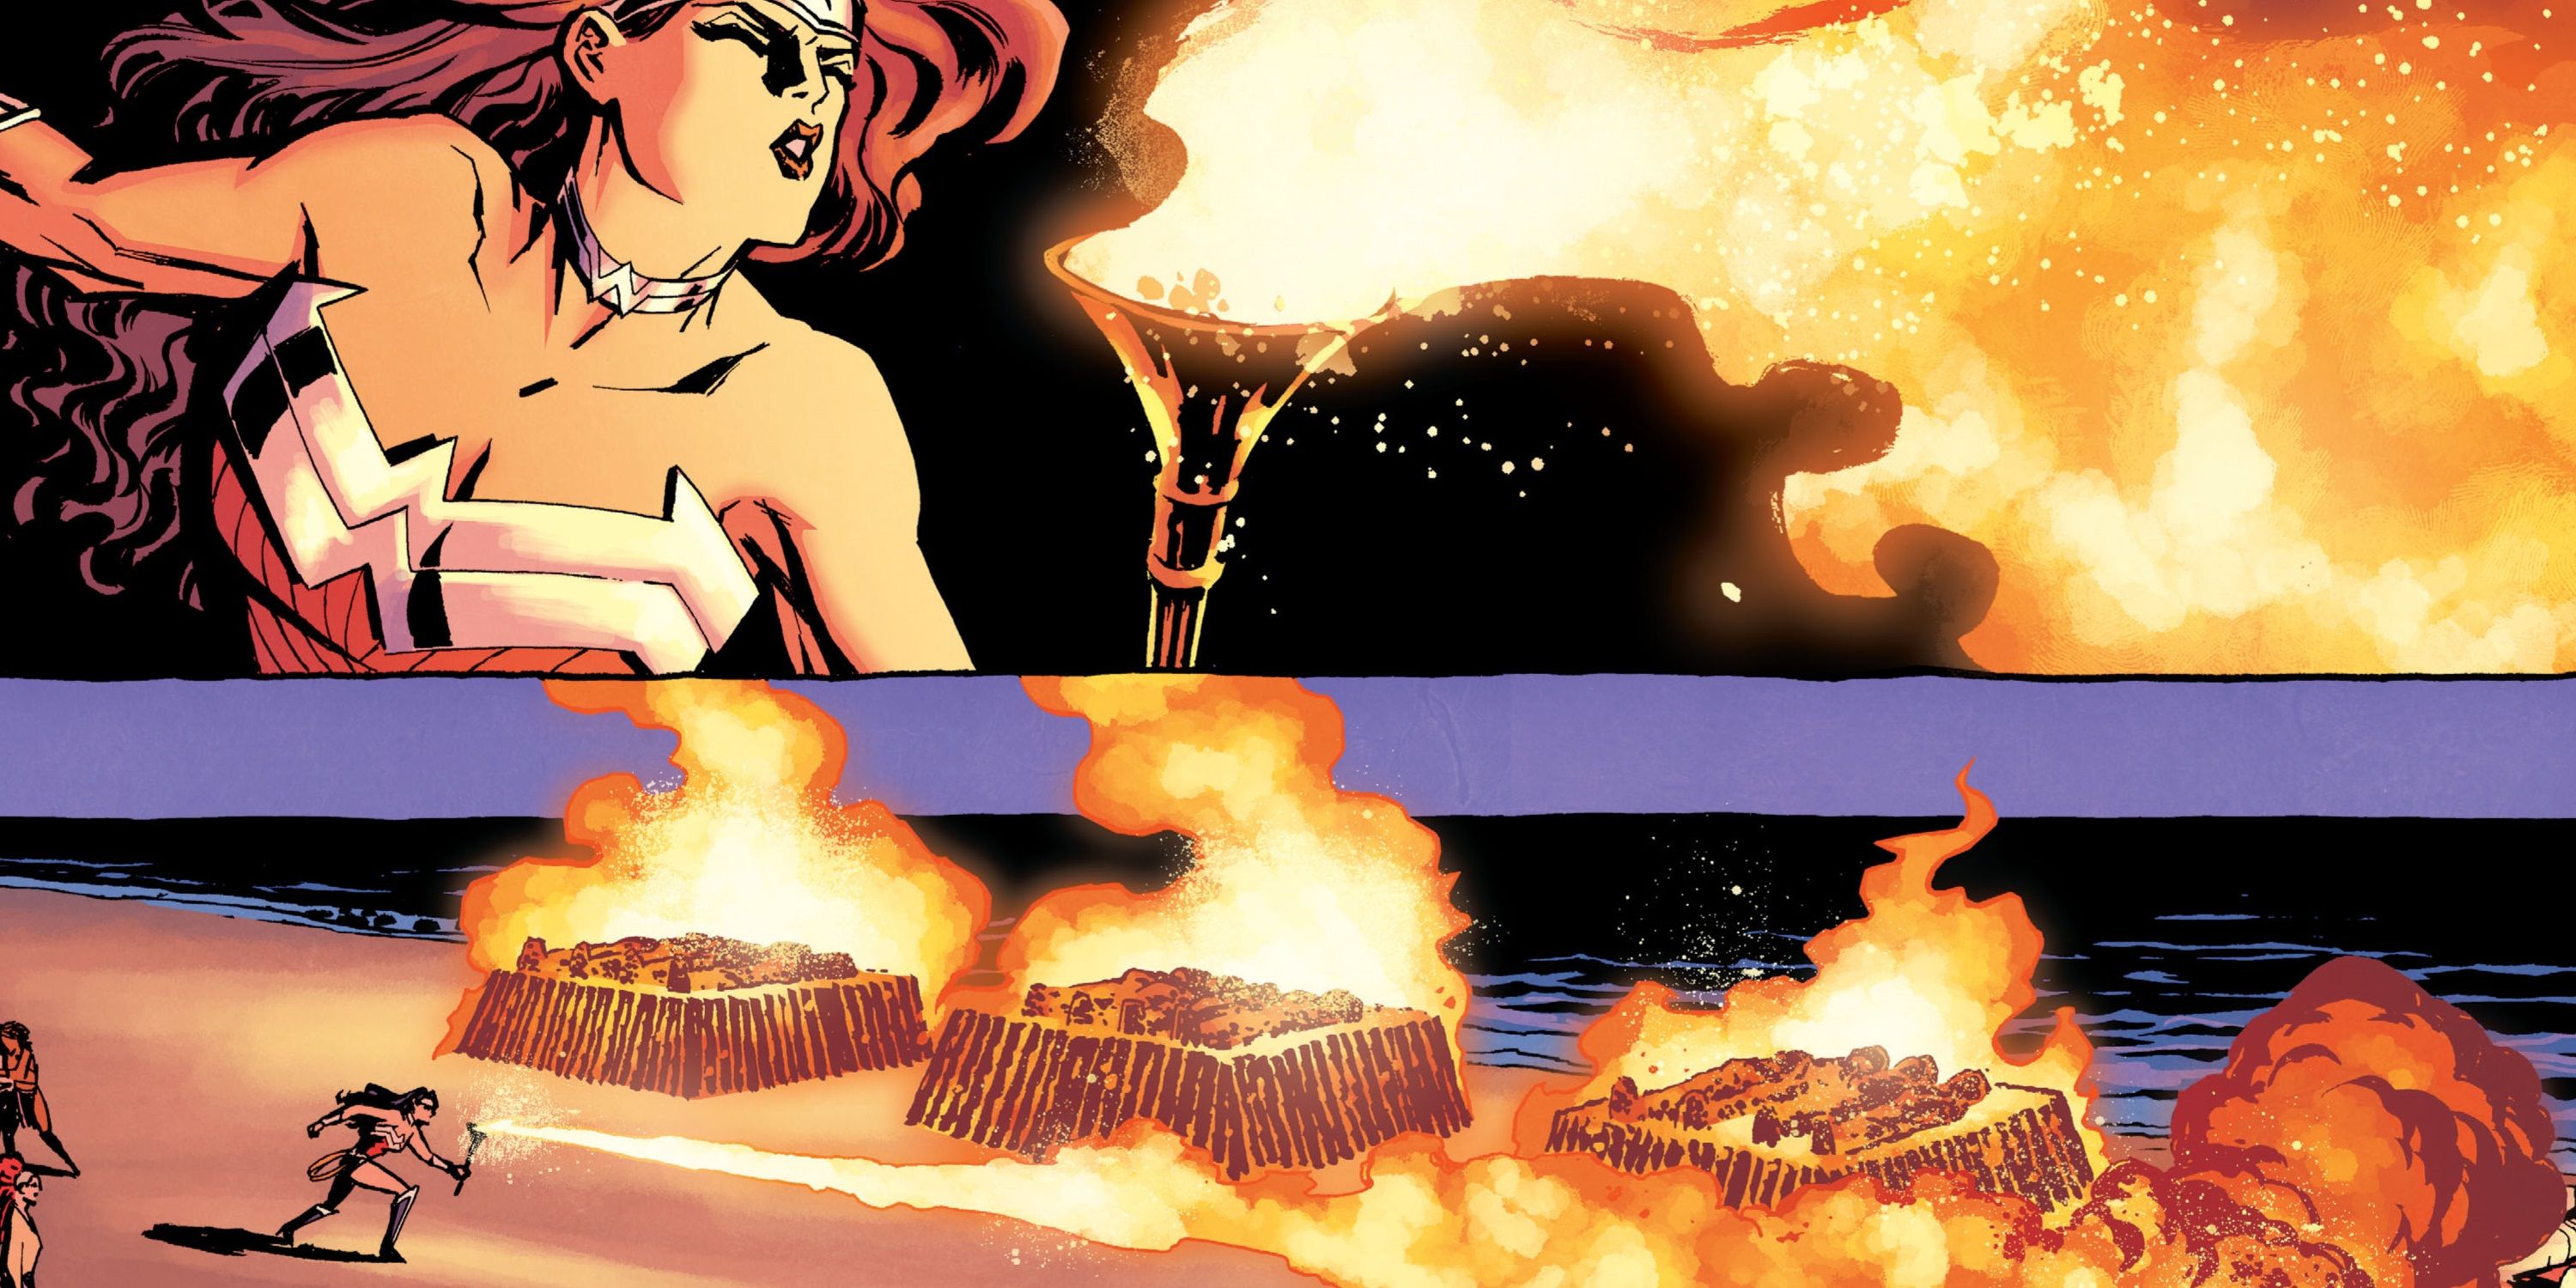 Wonder Woman using her super breath to blow fire